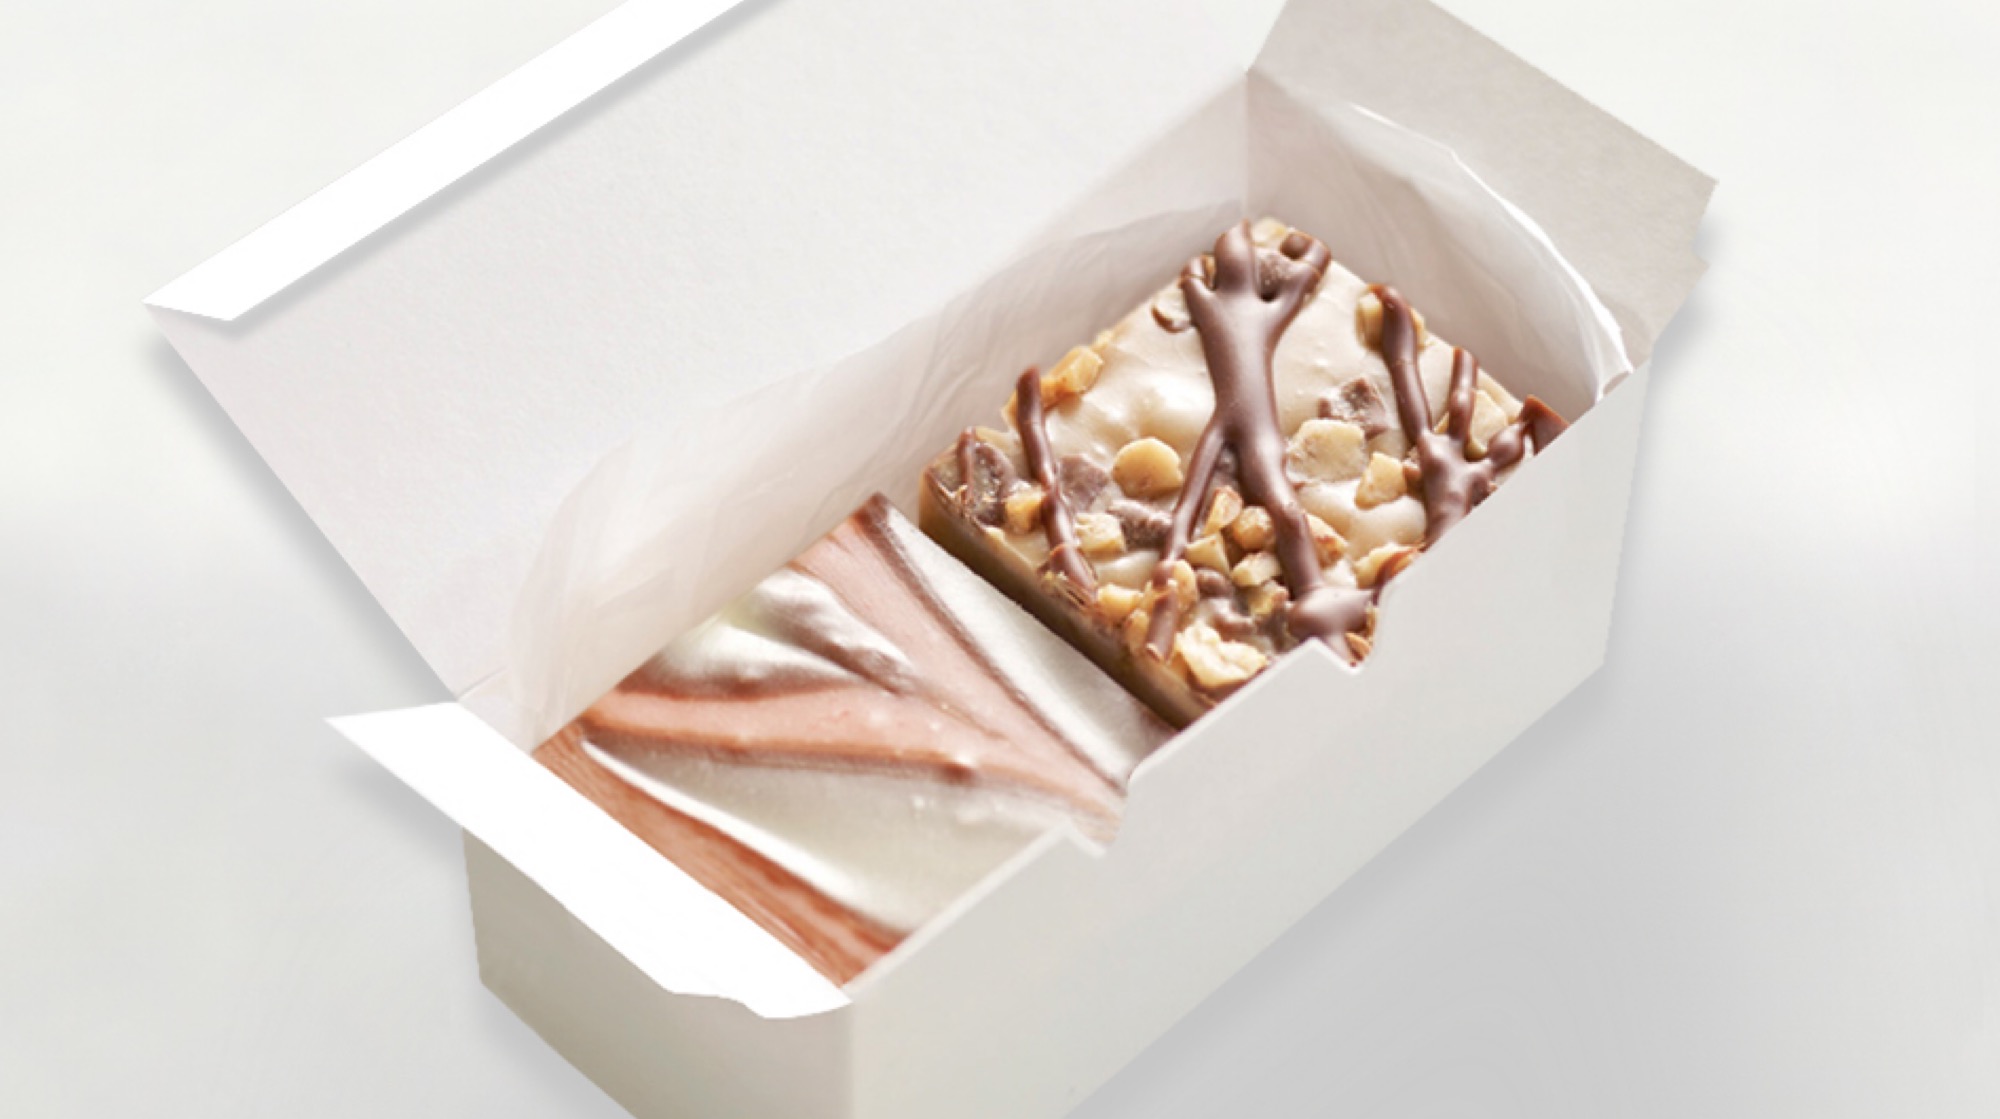 2 Piece Build a Box Fudge Packaged in box